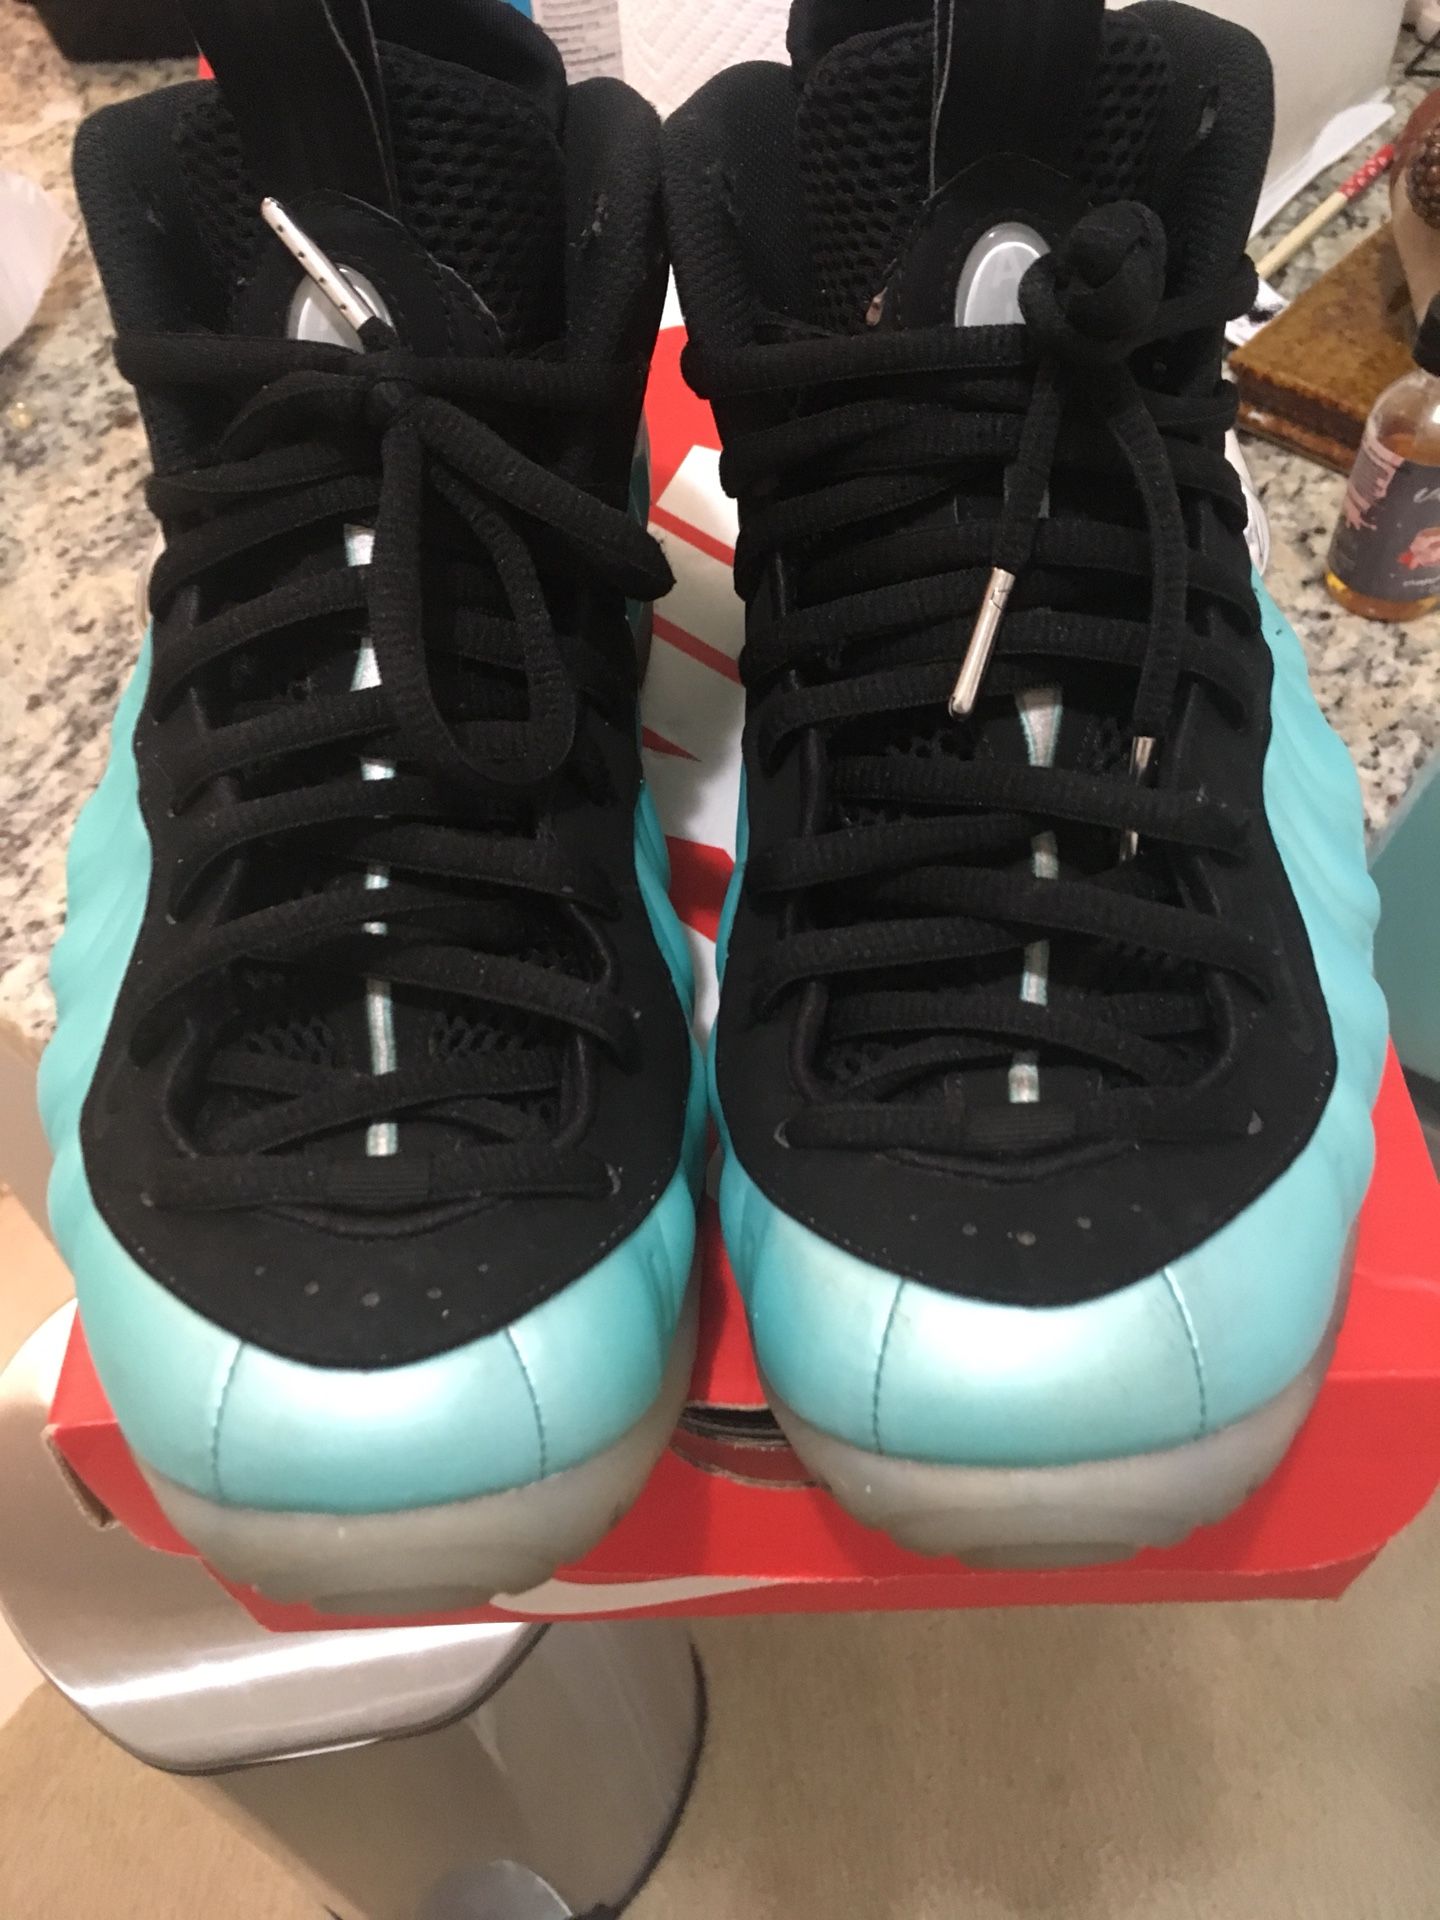 $90siZe 8.5